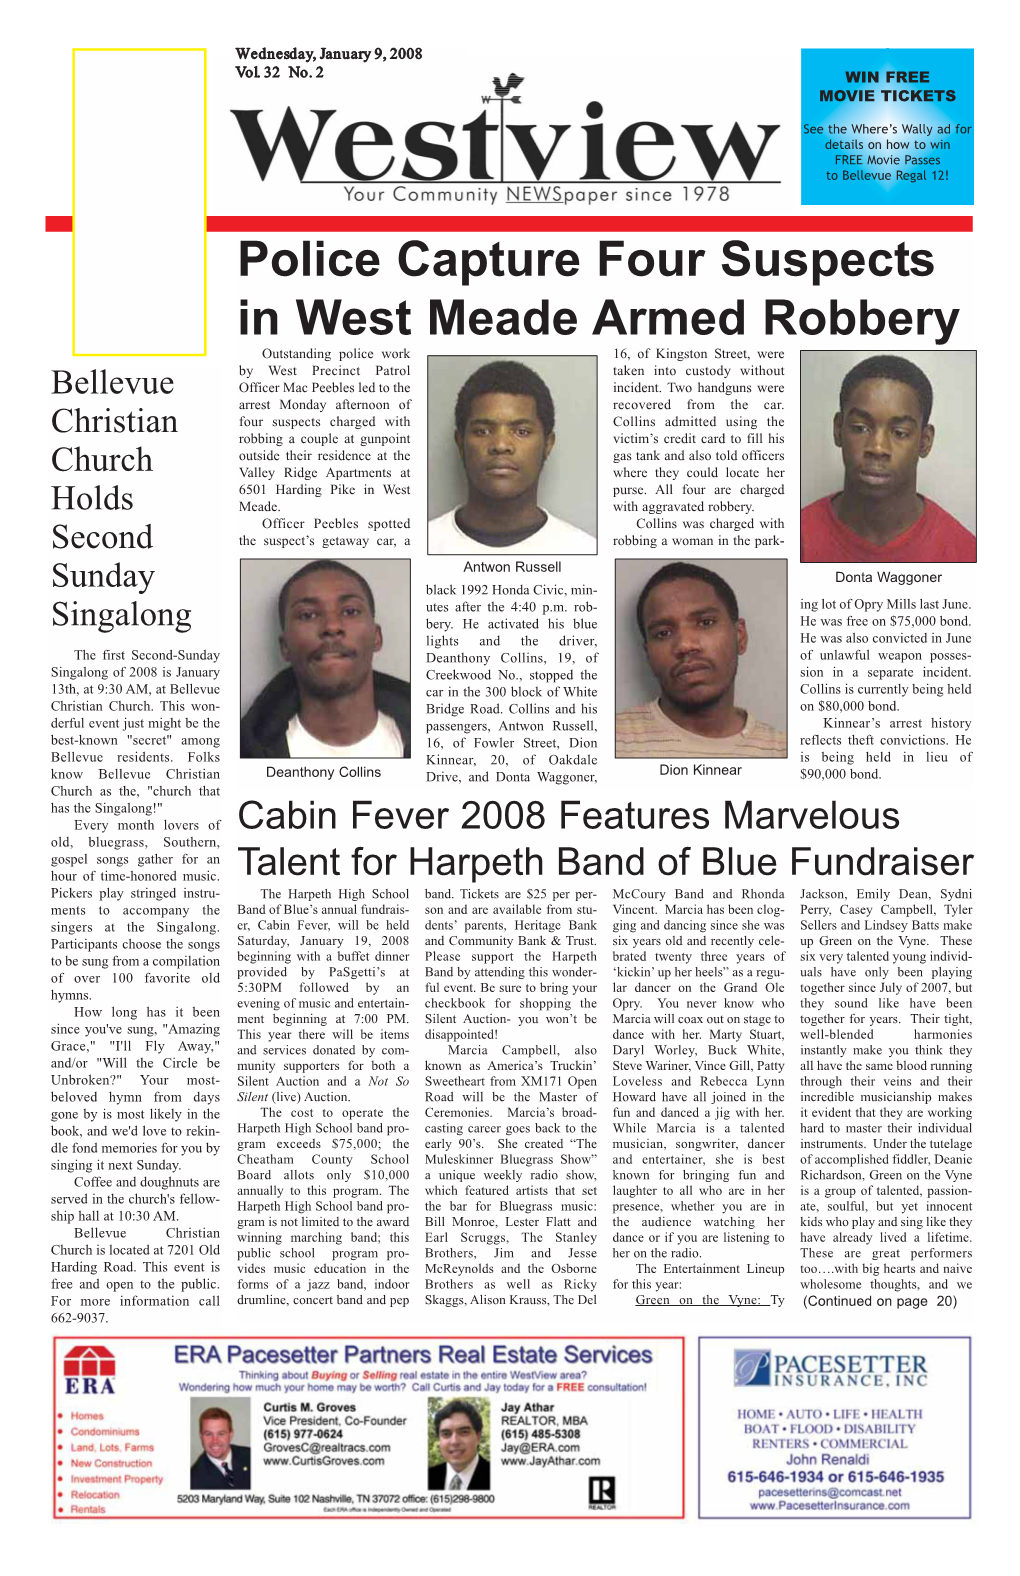 Police Capture Four Suspects in West Meade Armed Robbery